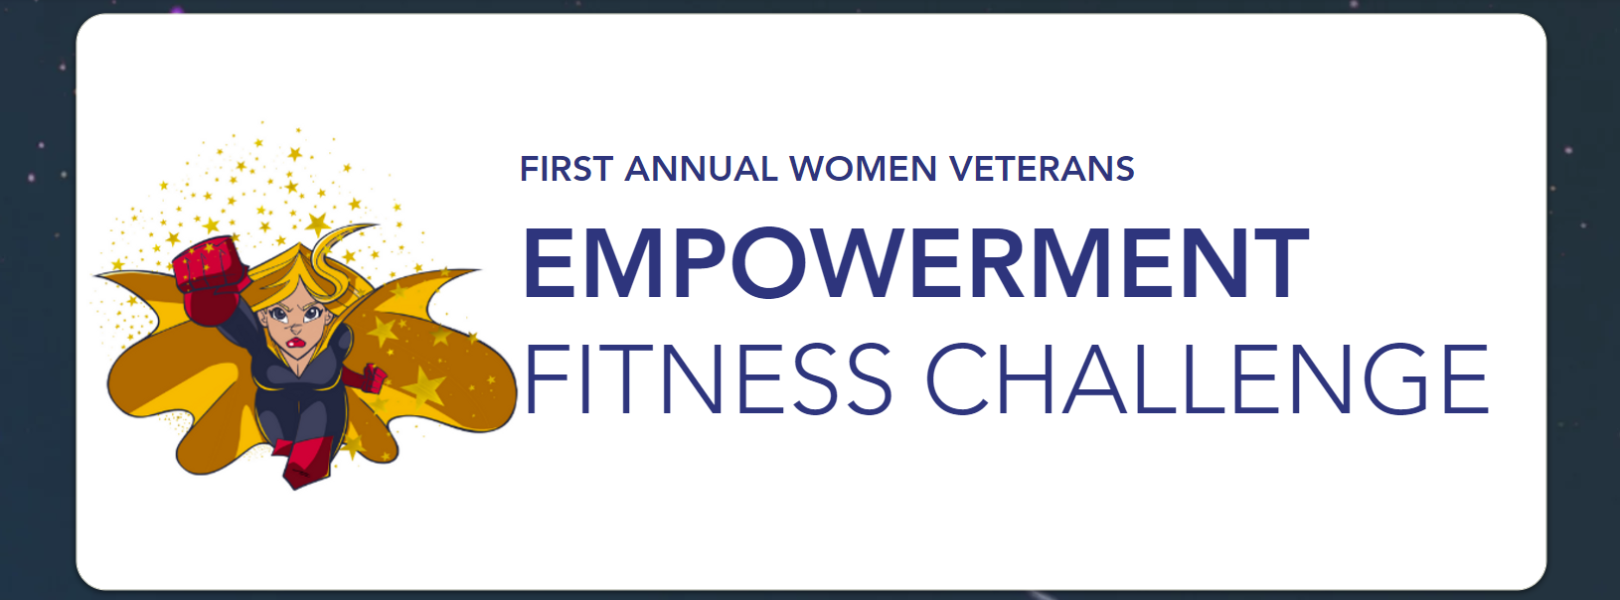 The First Annual Women Veterans Empowerment Fitness Challenge